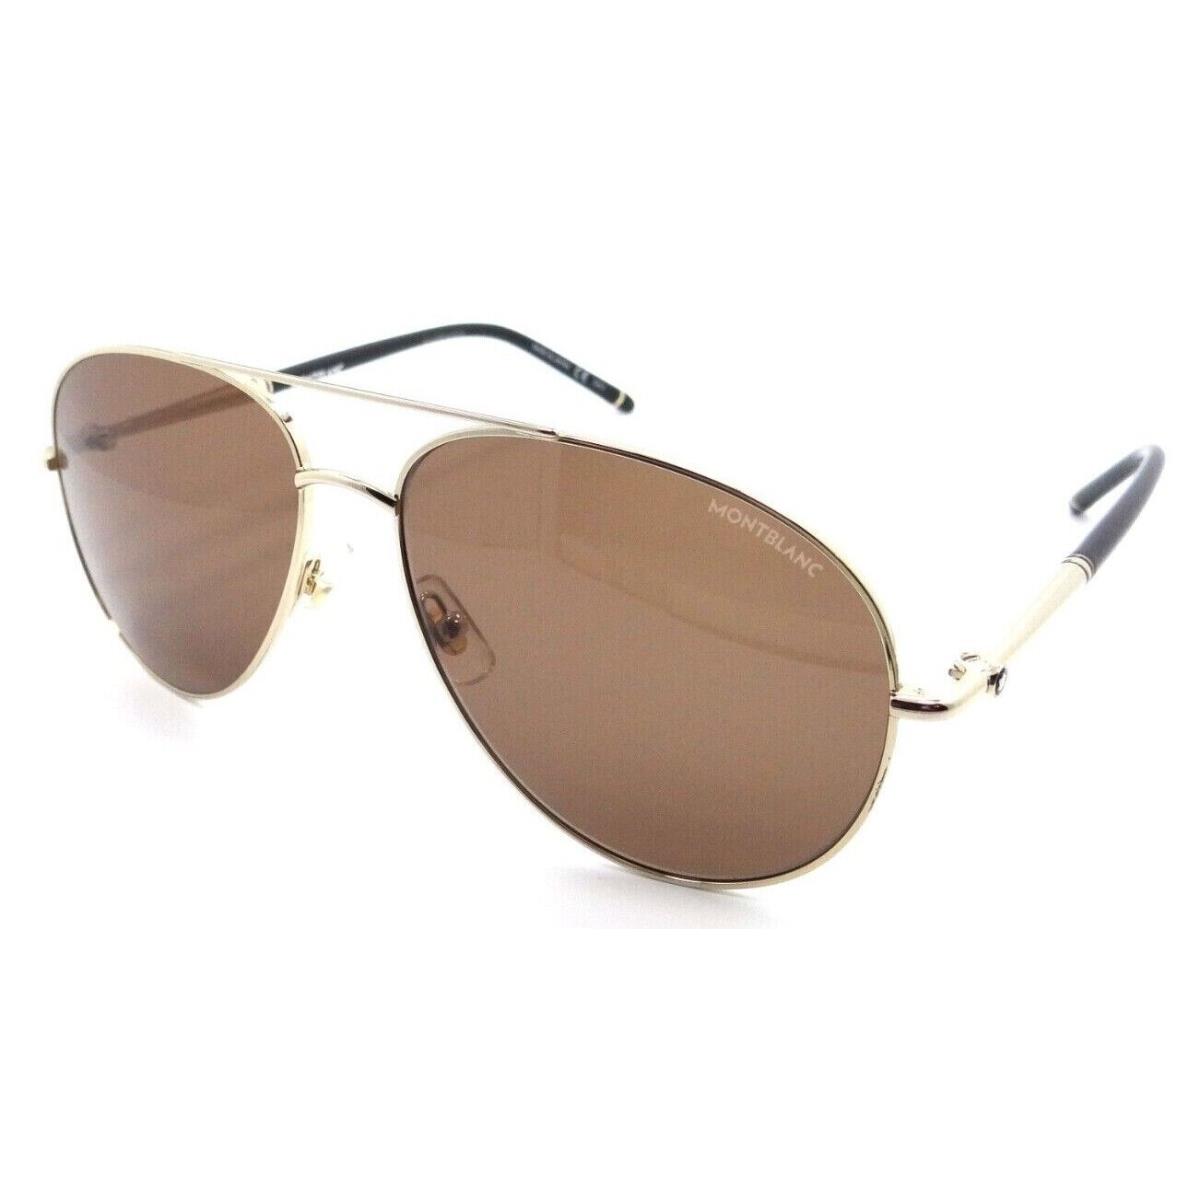 Montblanc Sunglasses MB0068S 001 61-15-145 Gold / Brown Made in Japan